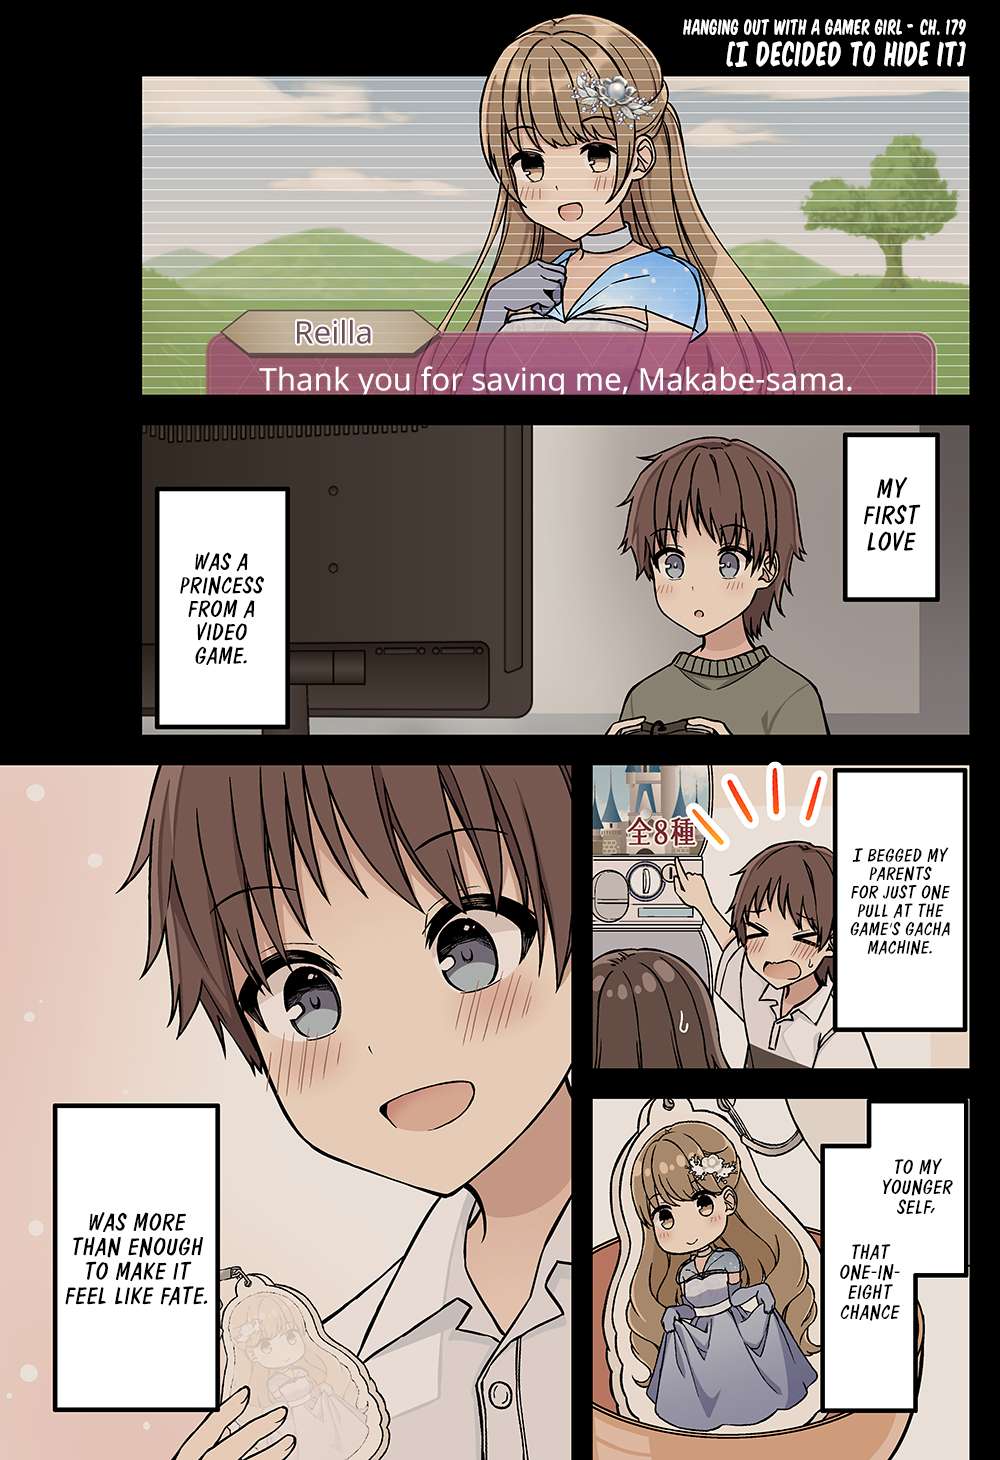 Hanging Out With a Gamer Girl - chapter 179 - #1